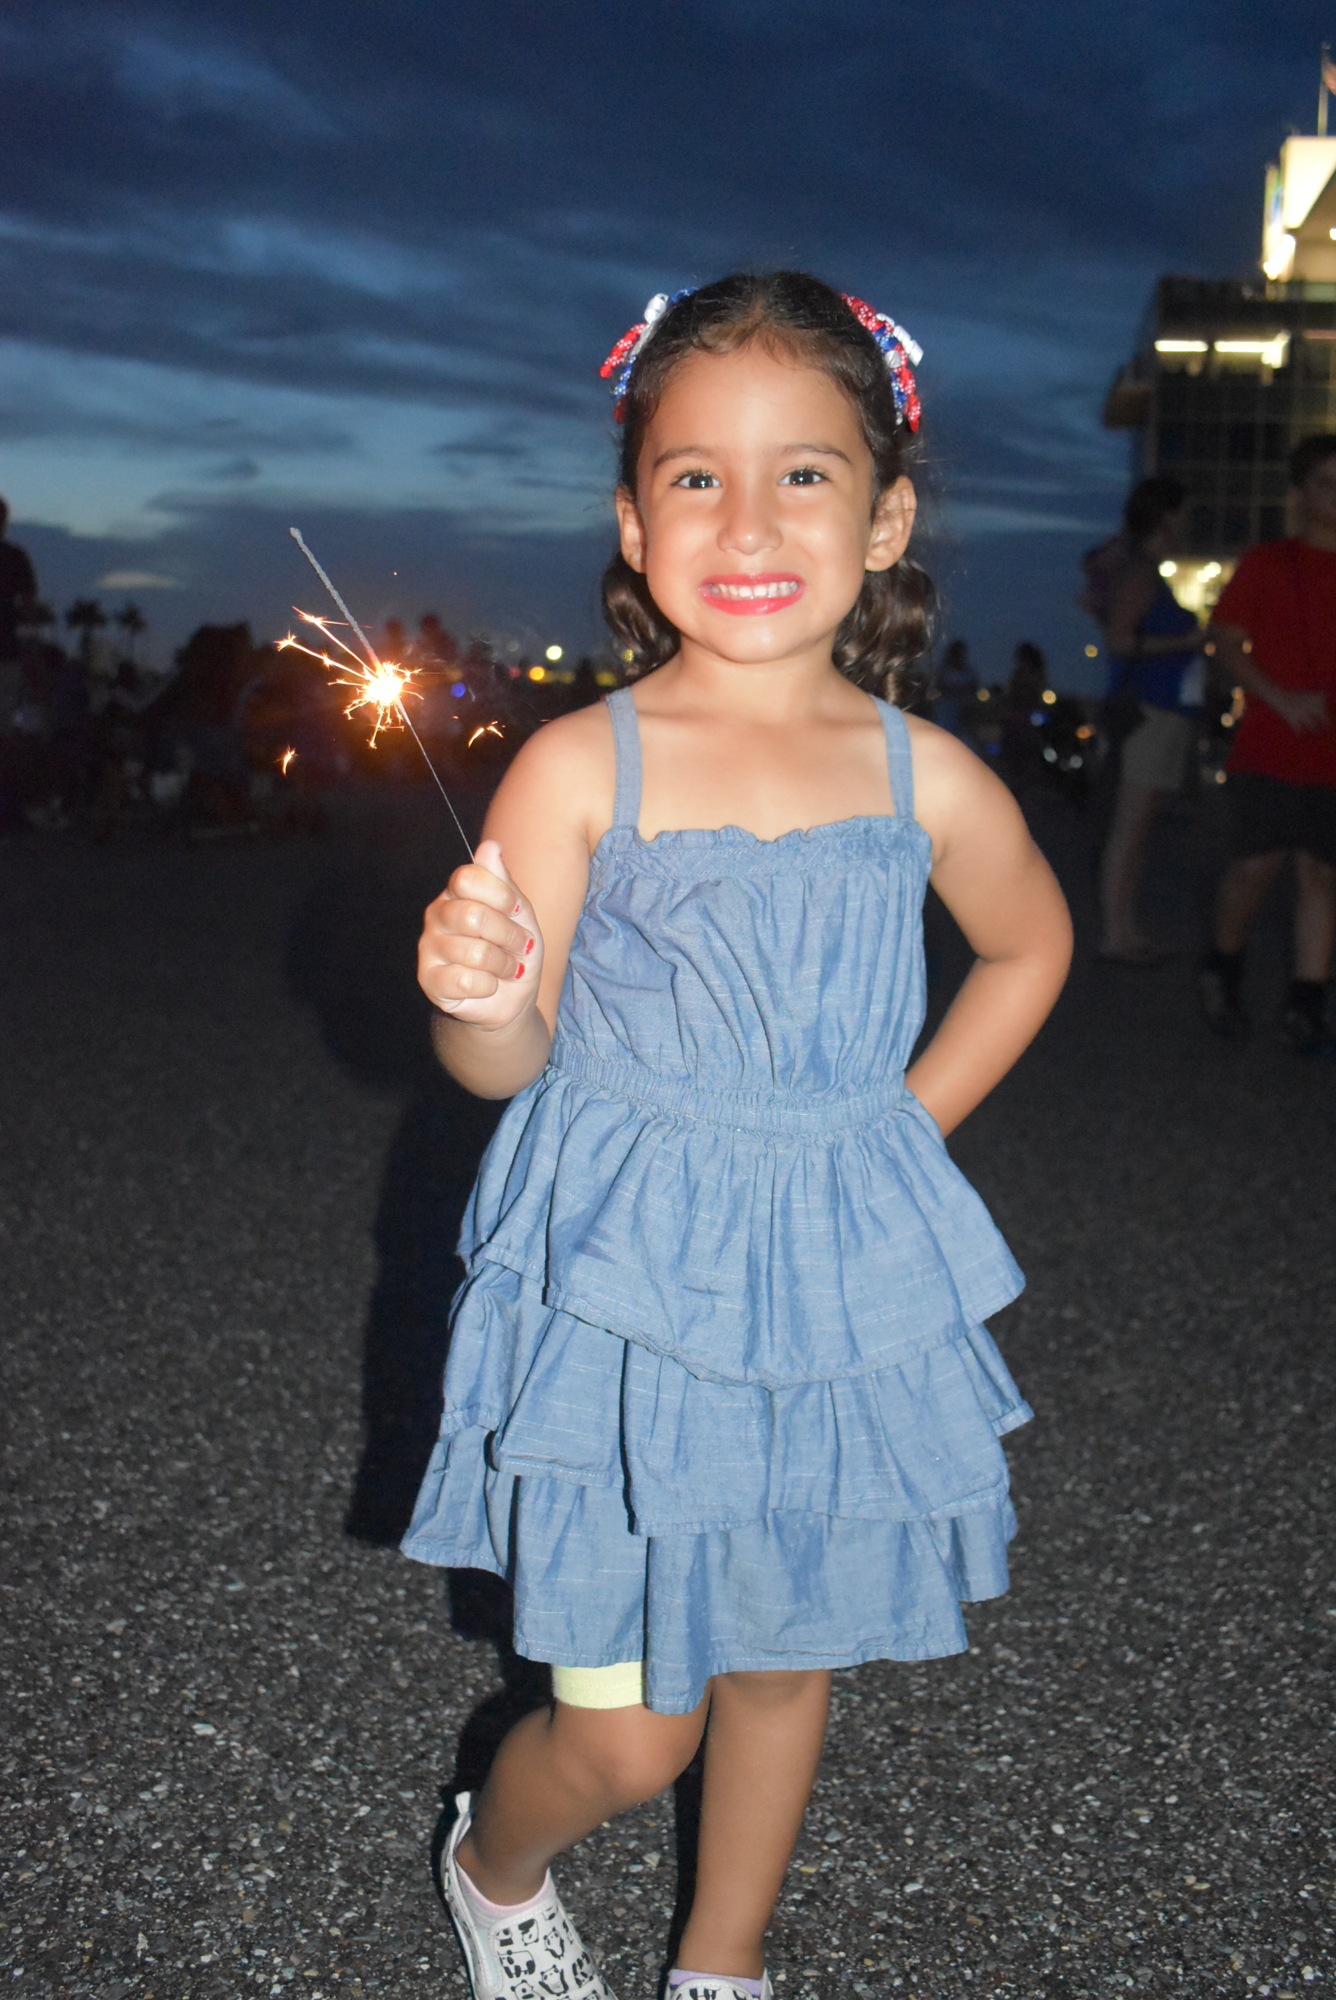 Sarasota's Abriana Navarro, 4, plays with a sparkler just minutes before the 2021 fireworks show began. (File photo)